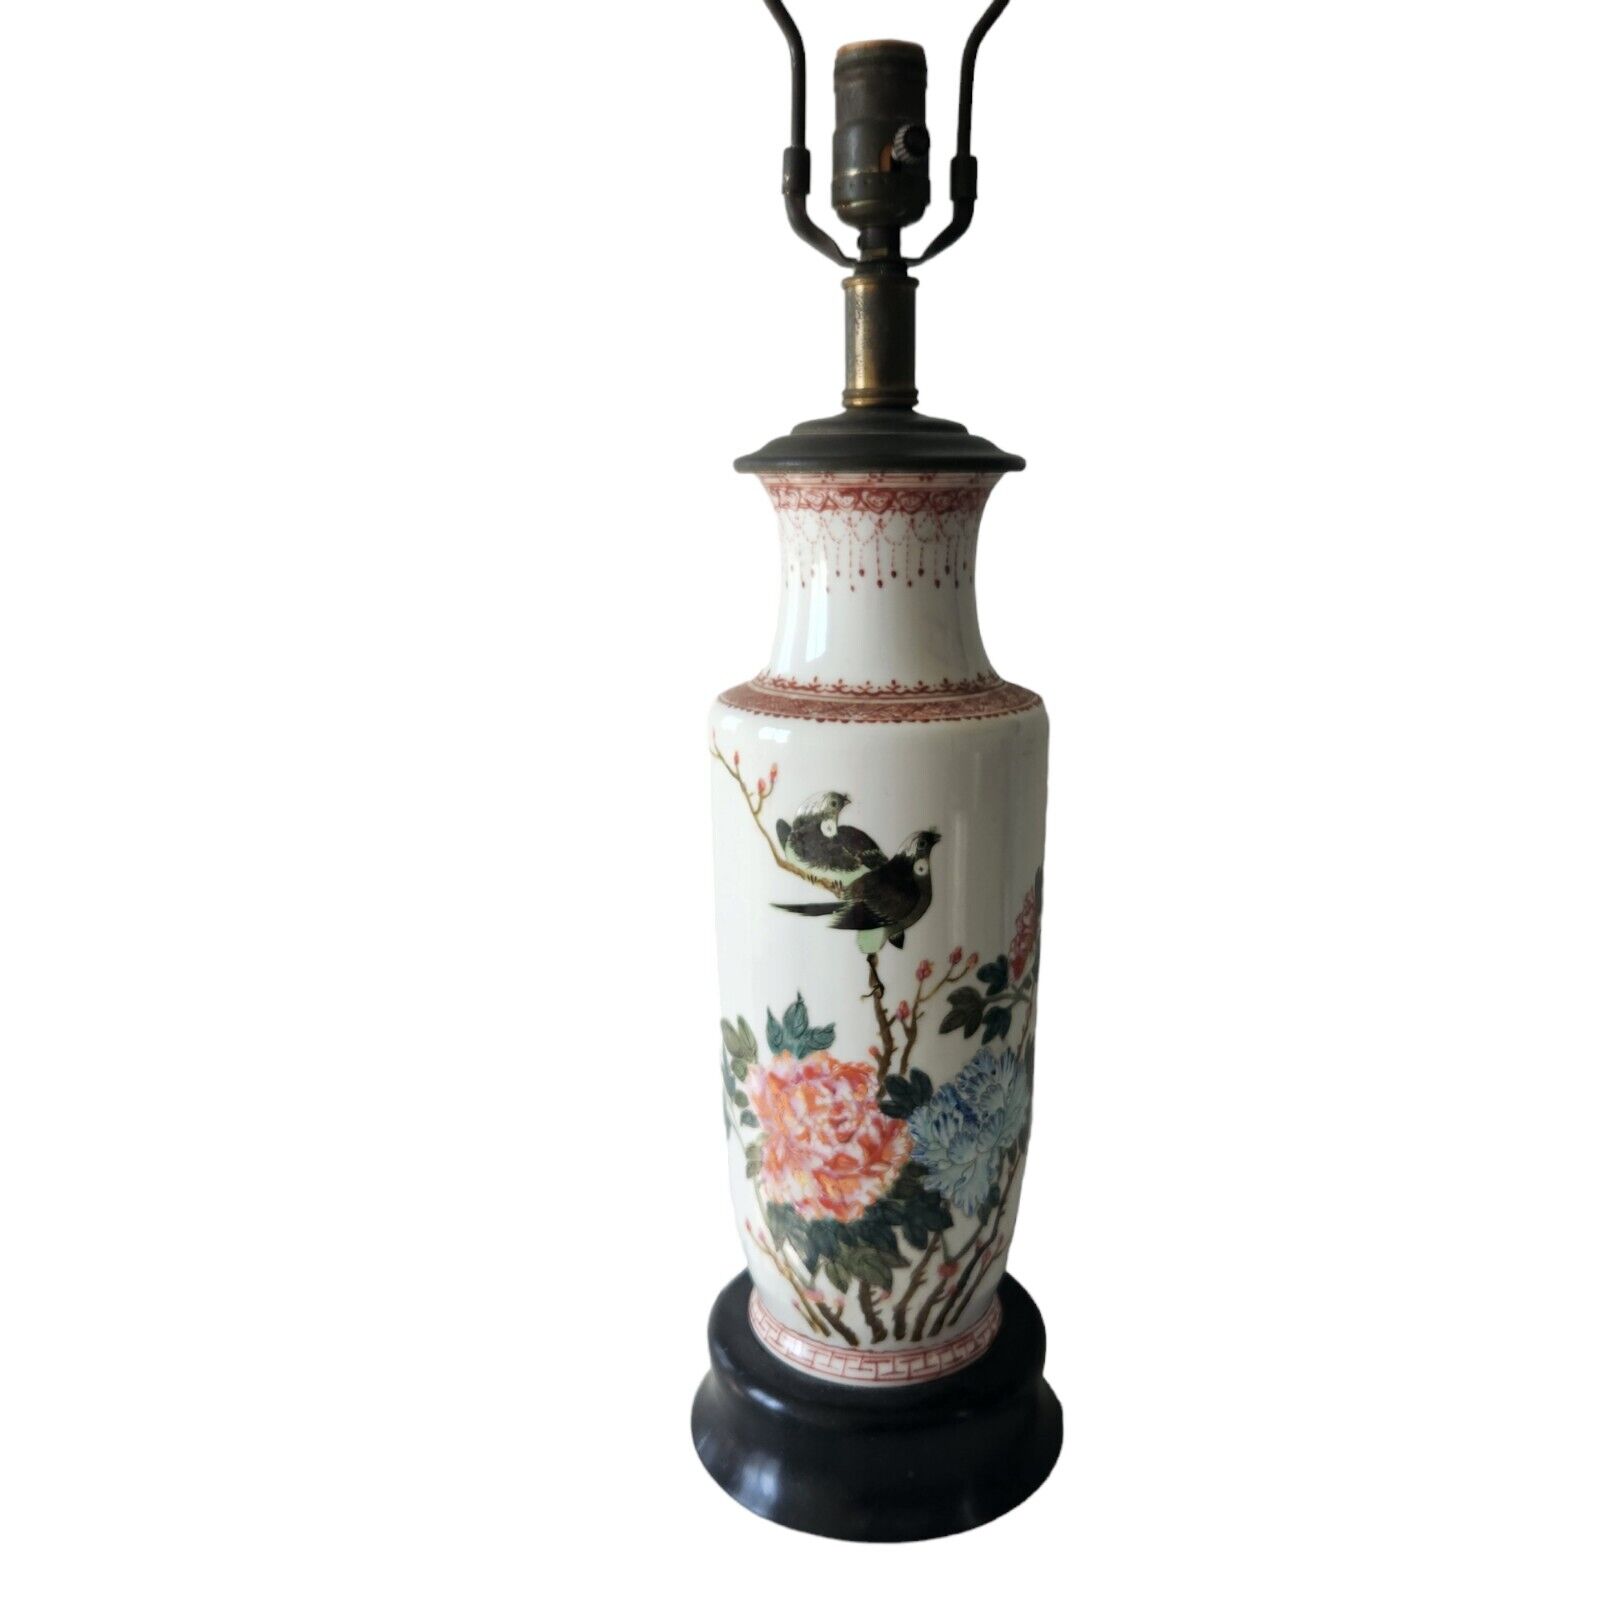 Vintage Antique Chinese Table Lamp Stamped Floral Handpainted